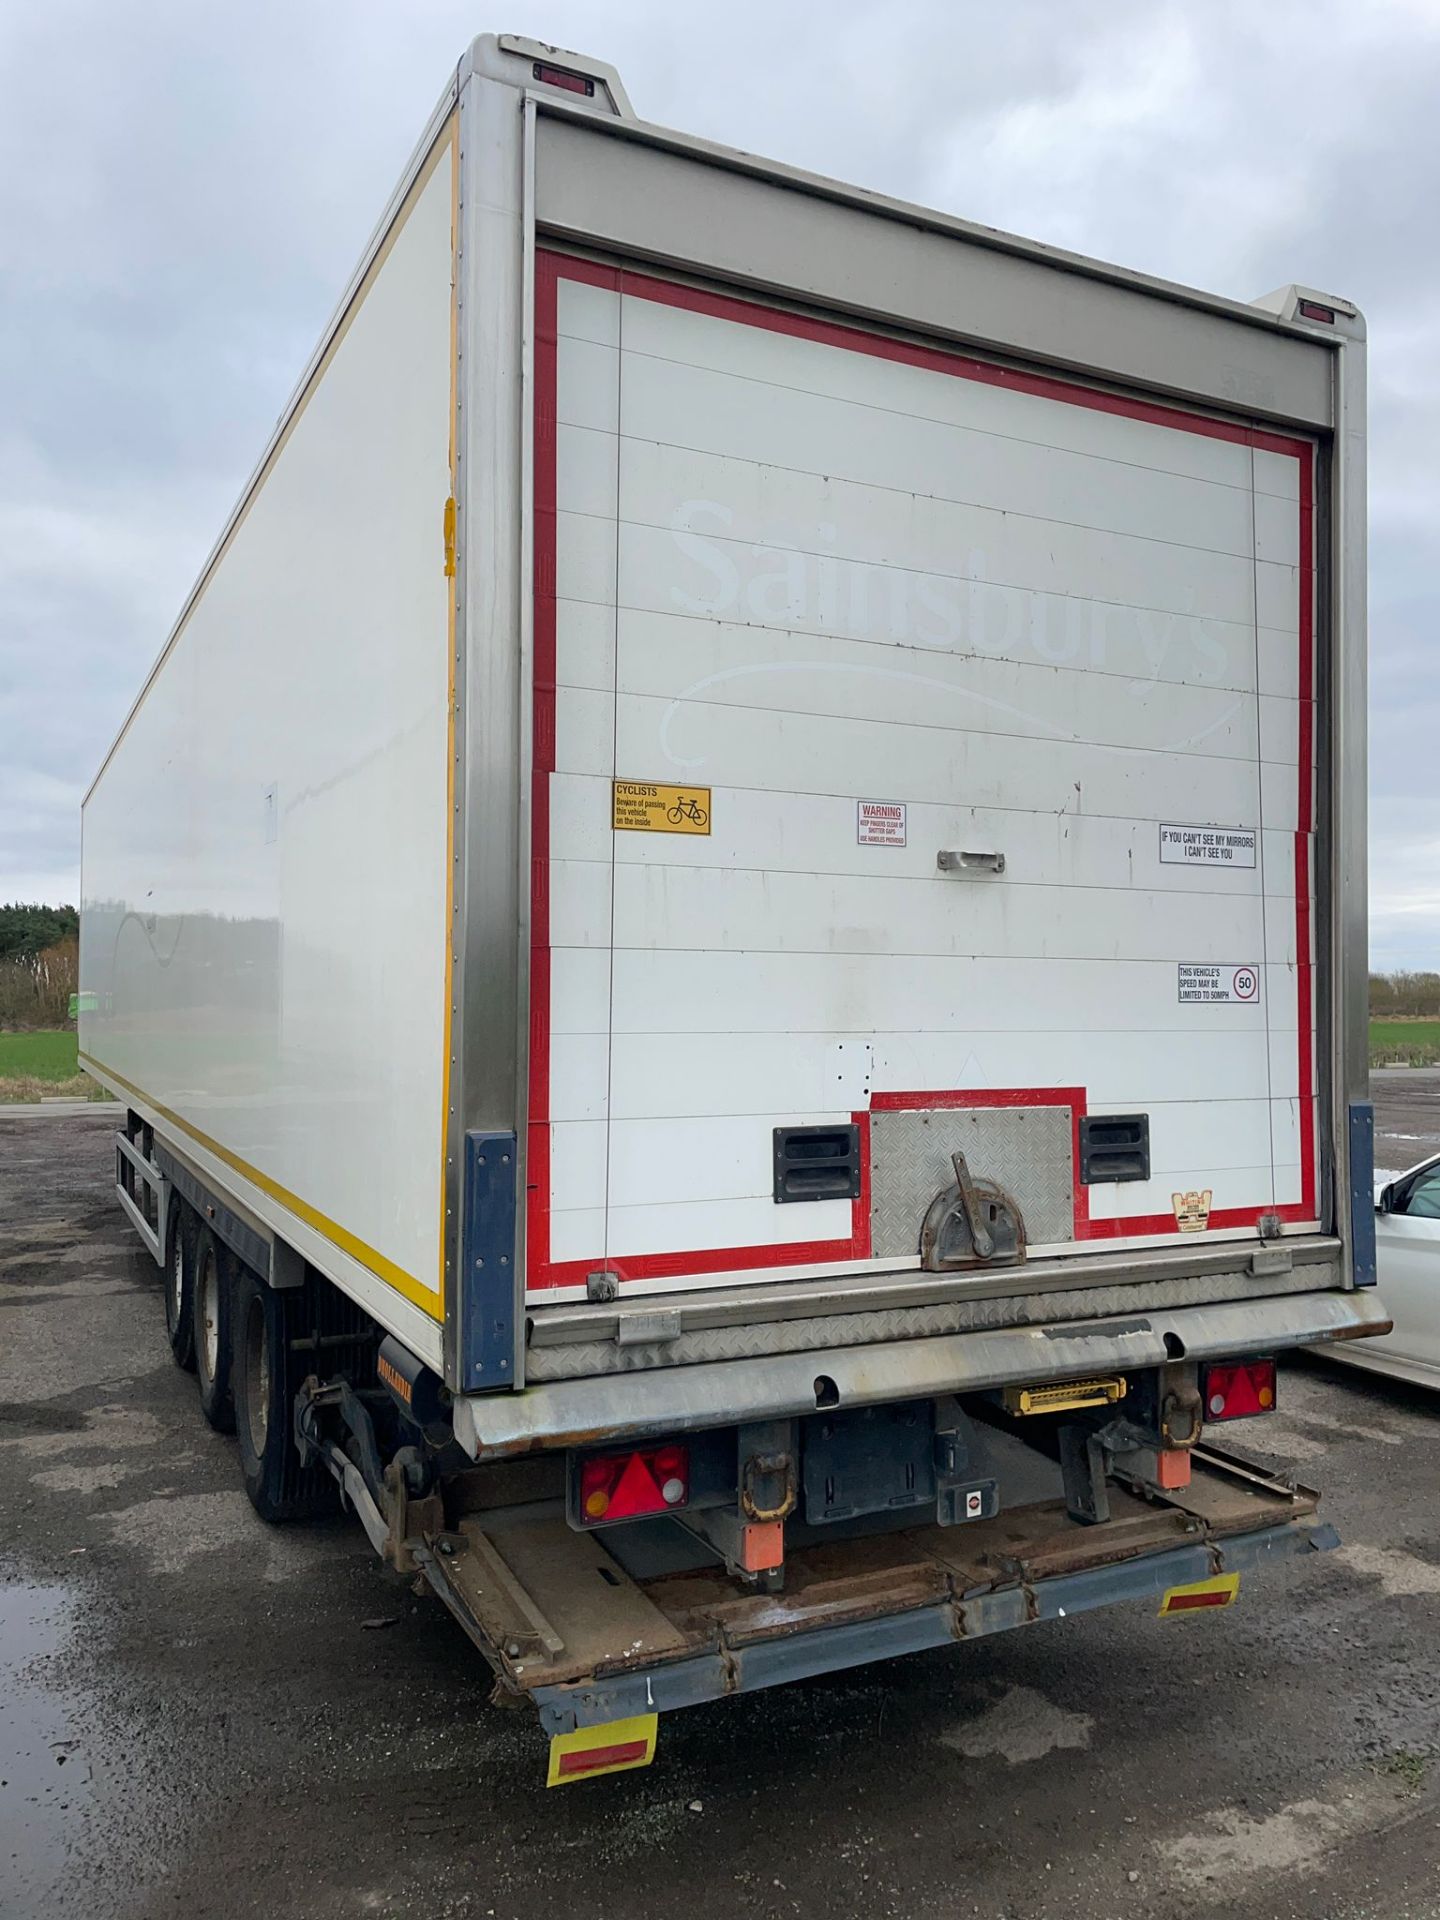 65758XCT – 2015 Montracon 13.6m Refrigerated Trailer - Image 7 of 12